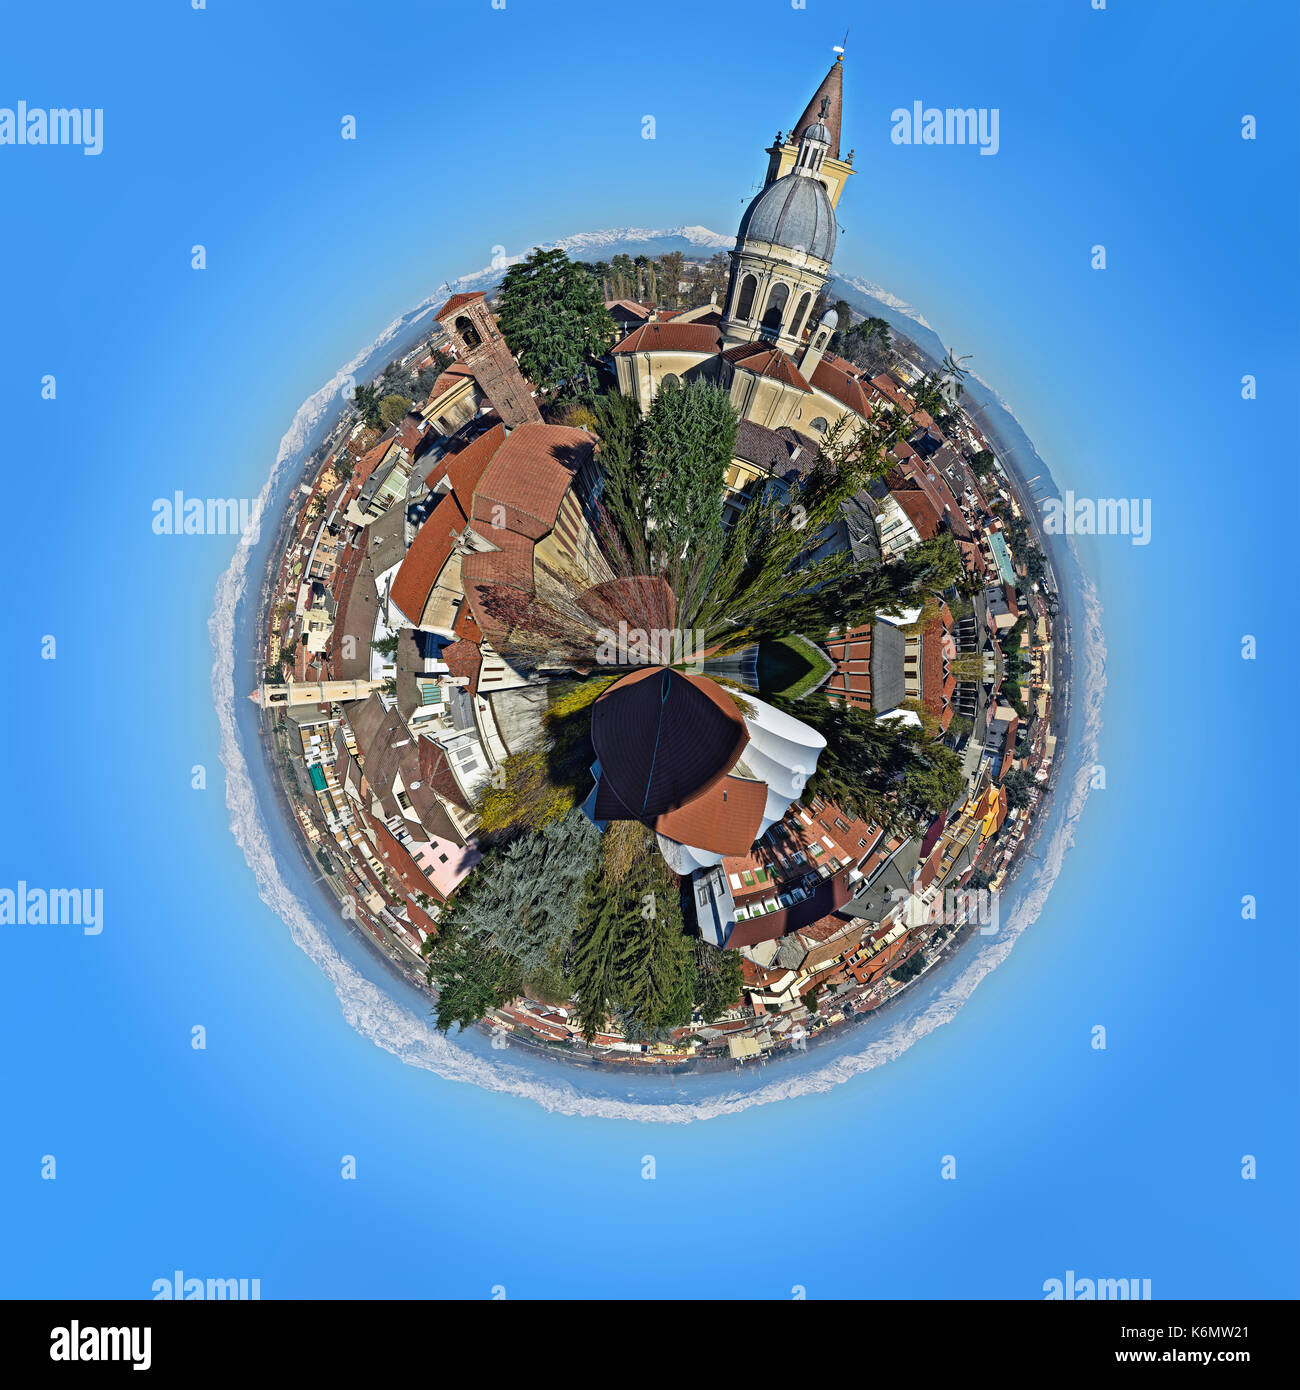 small planet consisting of palaces and buildings of the village of Trecate, a country in Italy Stock Photo